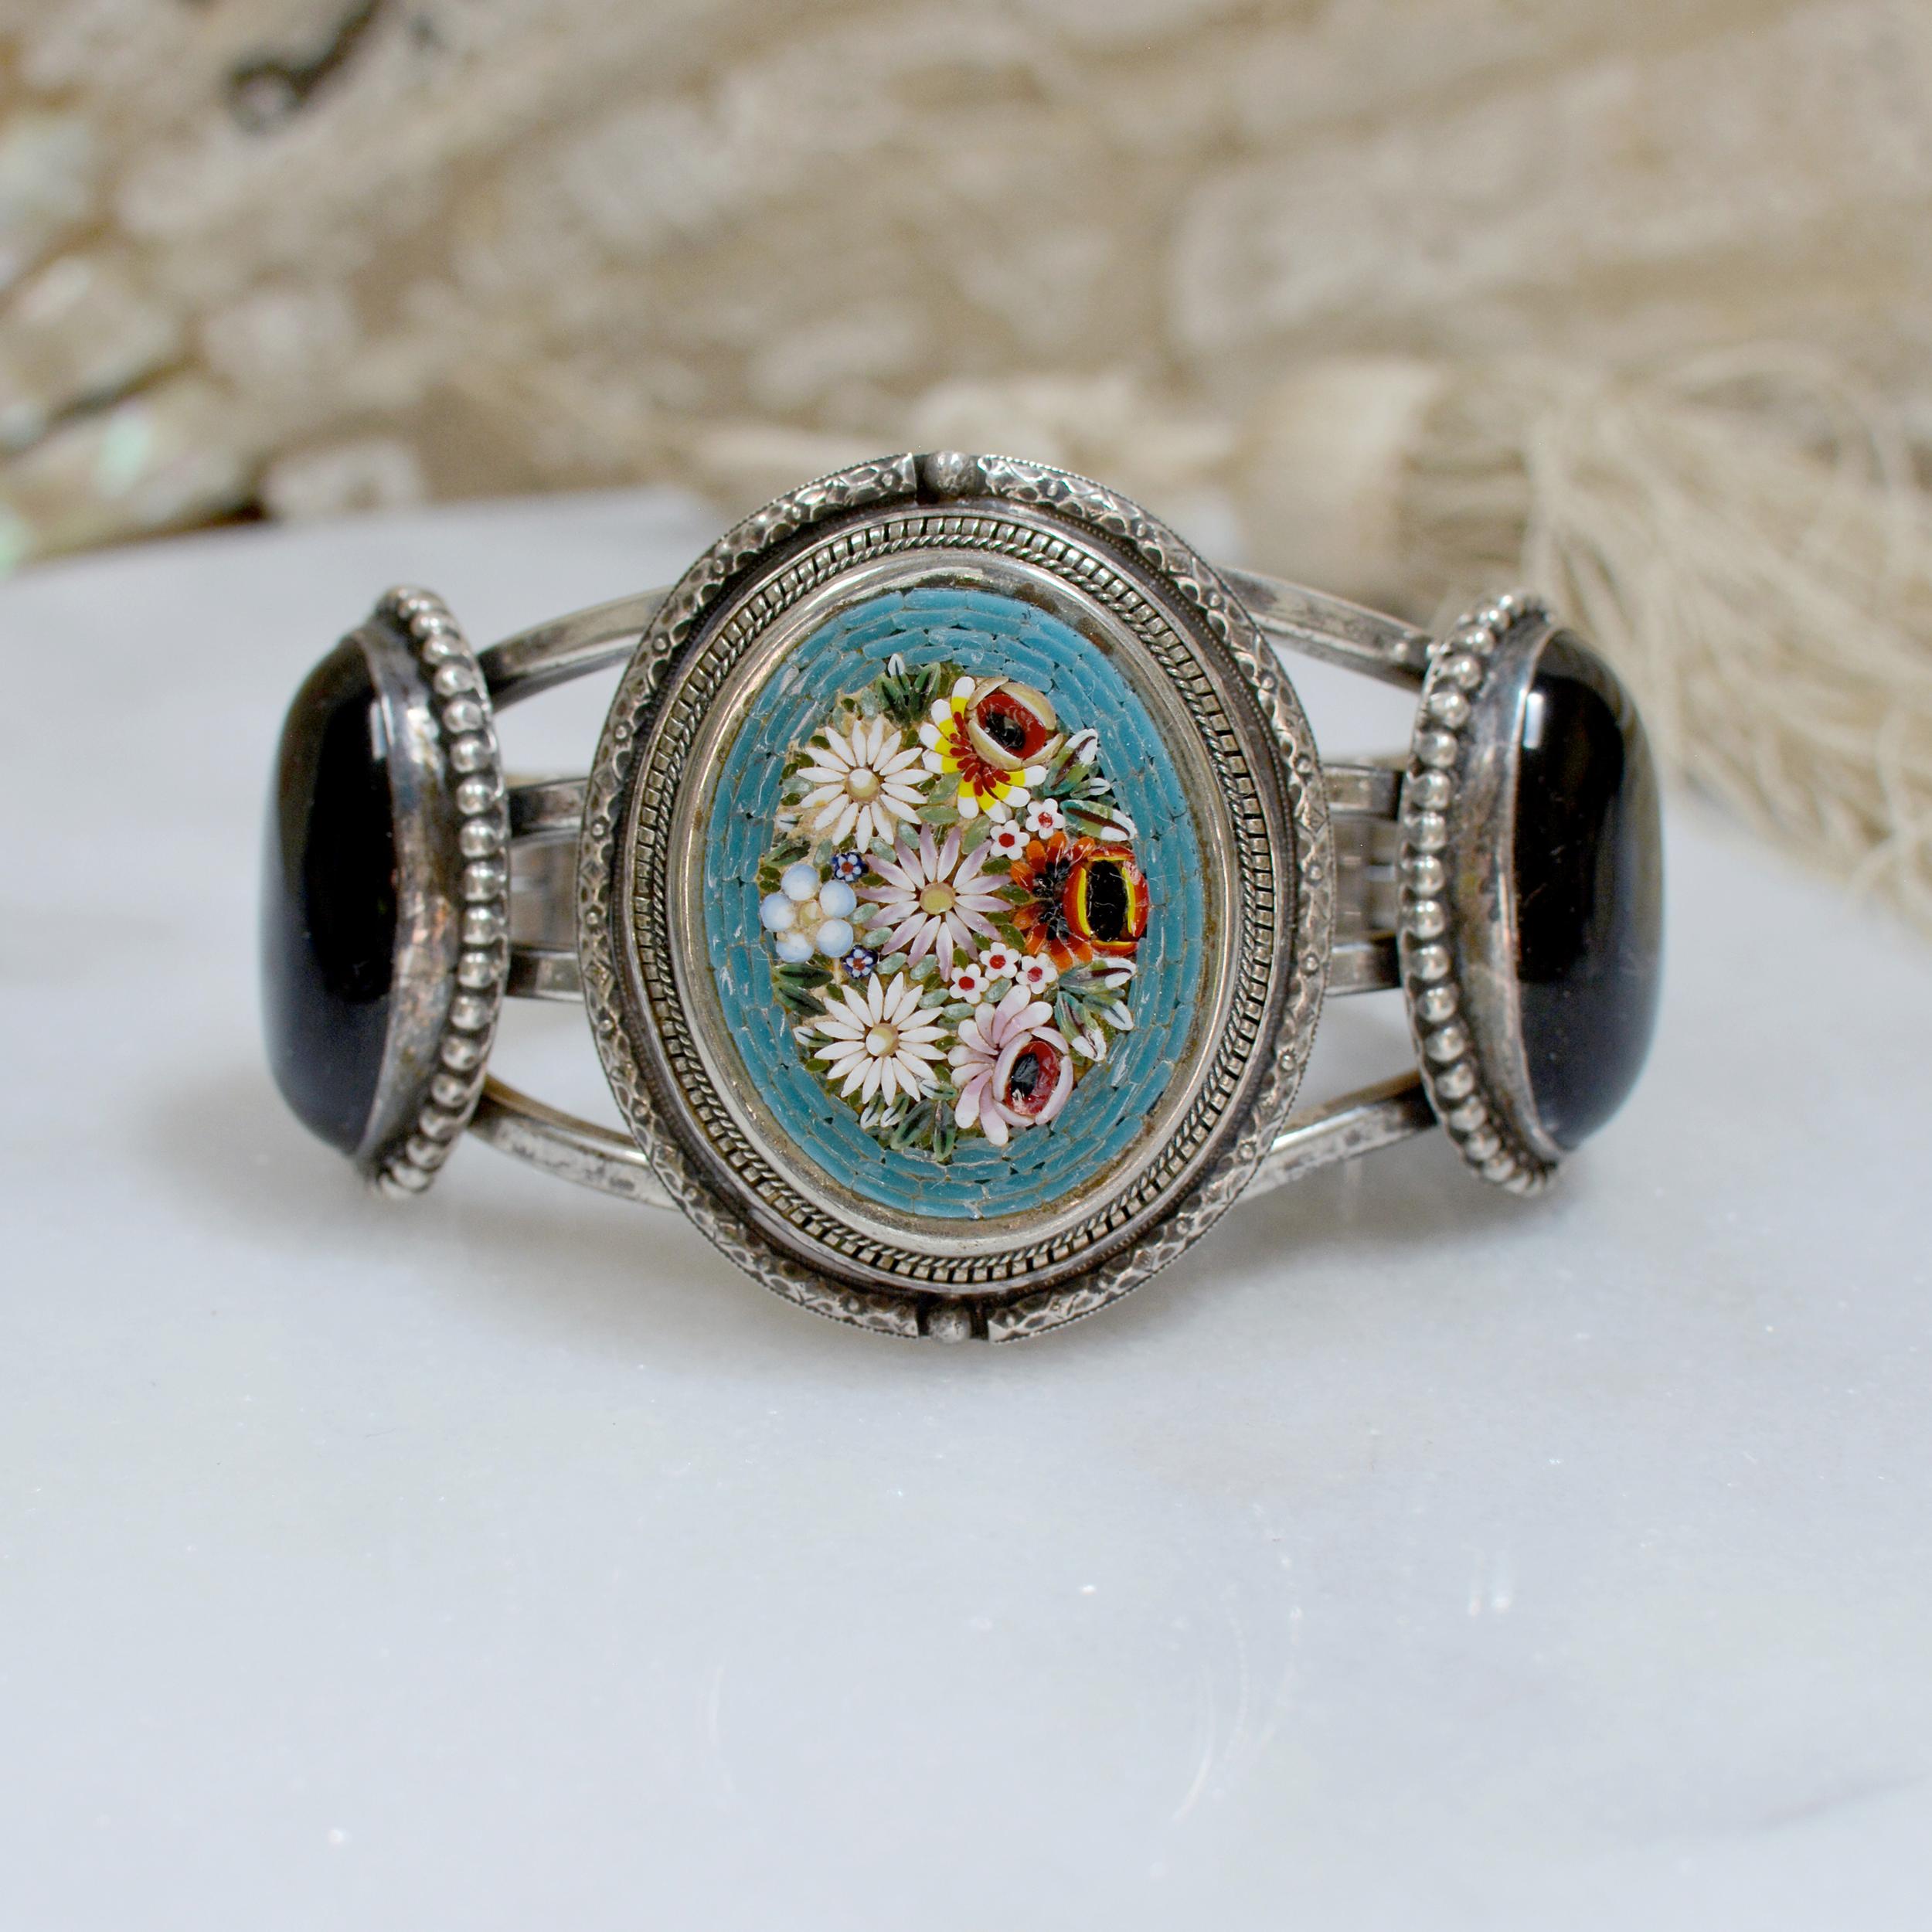 This bold one of a kind Sterling Silver cuff bracelet features an early twentieth century antique Venetian tesserae micro-mosaic floral bouquet panel with an exquisitely engraved sterling frame having a beaded inner edge around the mosaic. Accenting